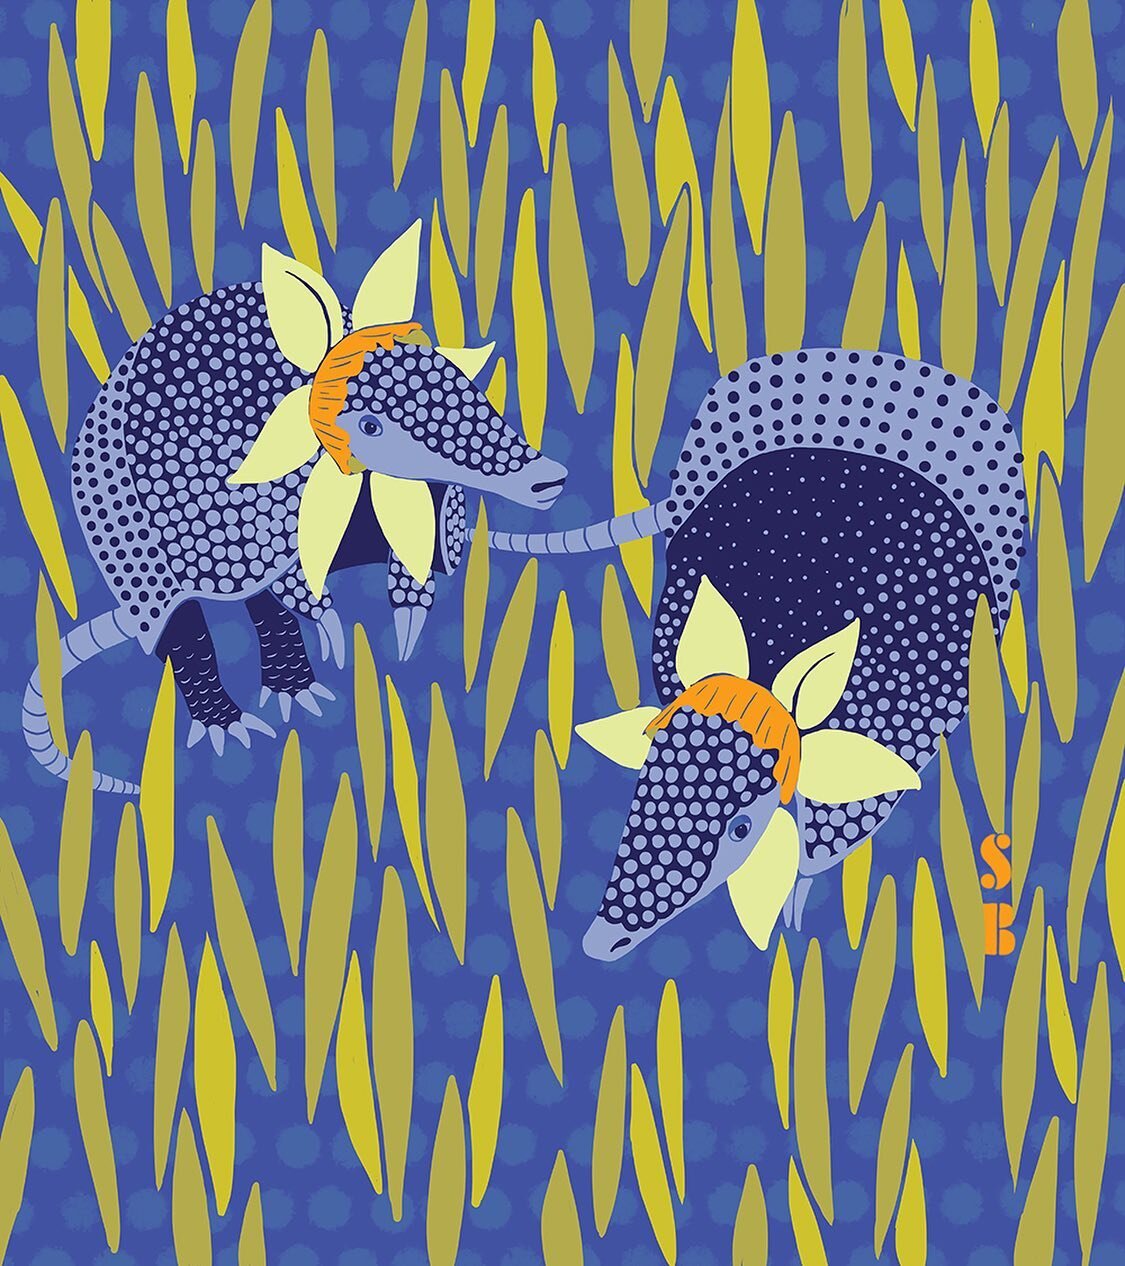 This oldie but goodie is in honor of all the beautiful tulips I saw in Washington State with my silly sisters. 
.
Get it? Daffadillos = armadillos + daffodils 
.
I&rsquo;m glad I get to offload my craziness in visual form and share them with you love